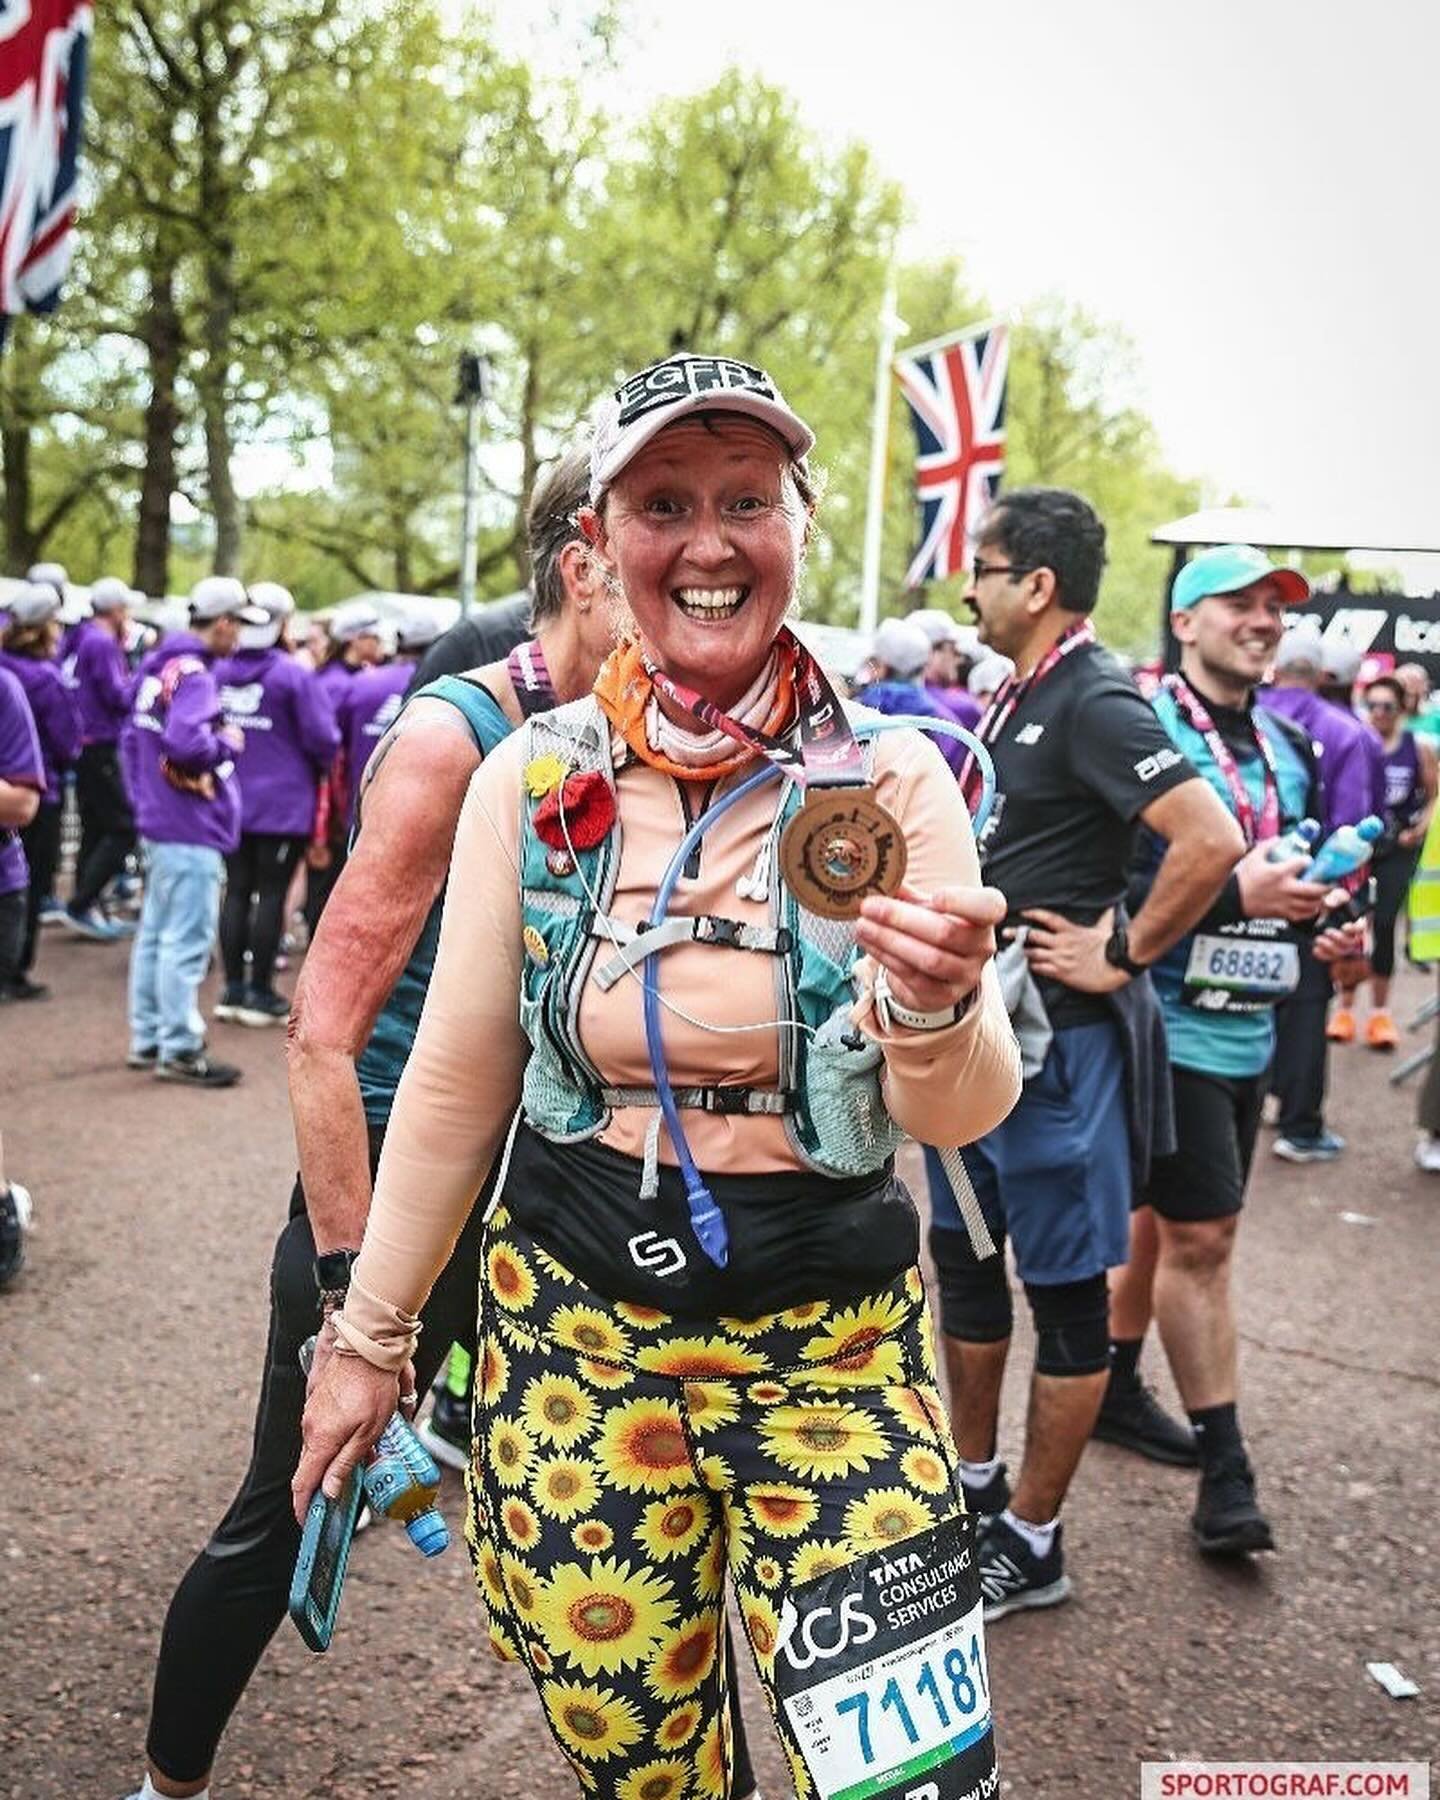 Last weekend, Vicky achieved an amazing personal best at the London Marathon, crossing the finish line at 5 hours and 52 minutes, all while raising funds for EGFR+ UK.

Since January &lsquo;23, Vicky has been running in honour of her beautiful mum, c